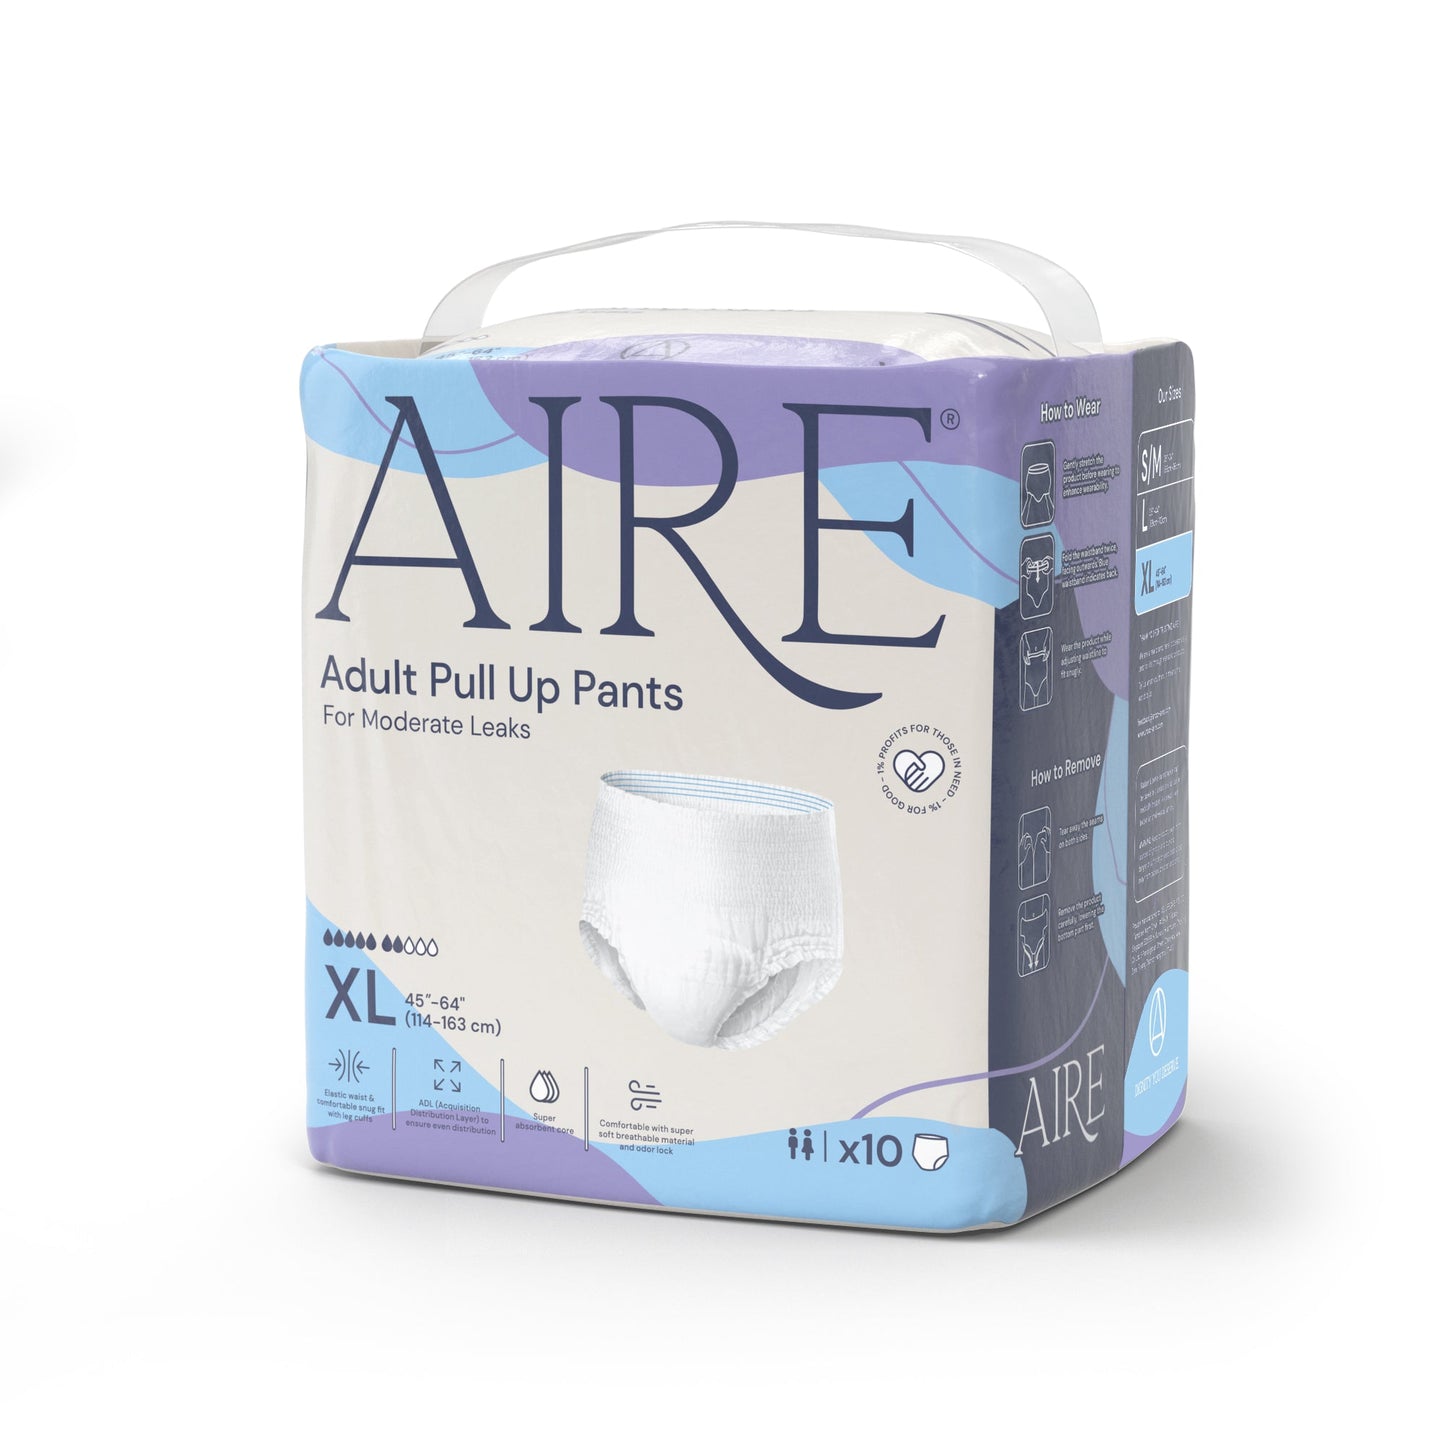 Aire Adult Diaper Pull Up Pants - Size XL (1X10 pcs) (Adult Diaper Pants, Highly Absorbent, Snug, Breathable)